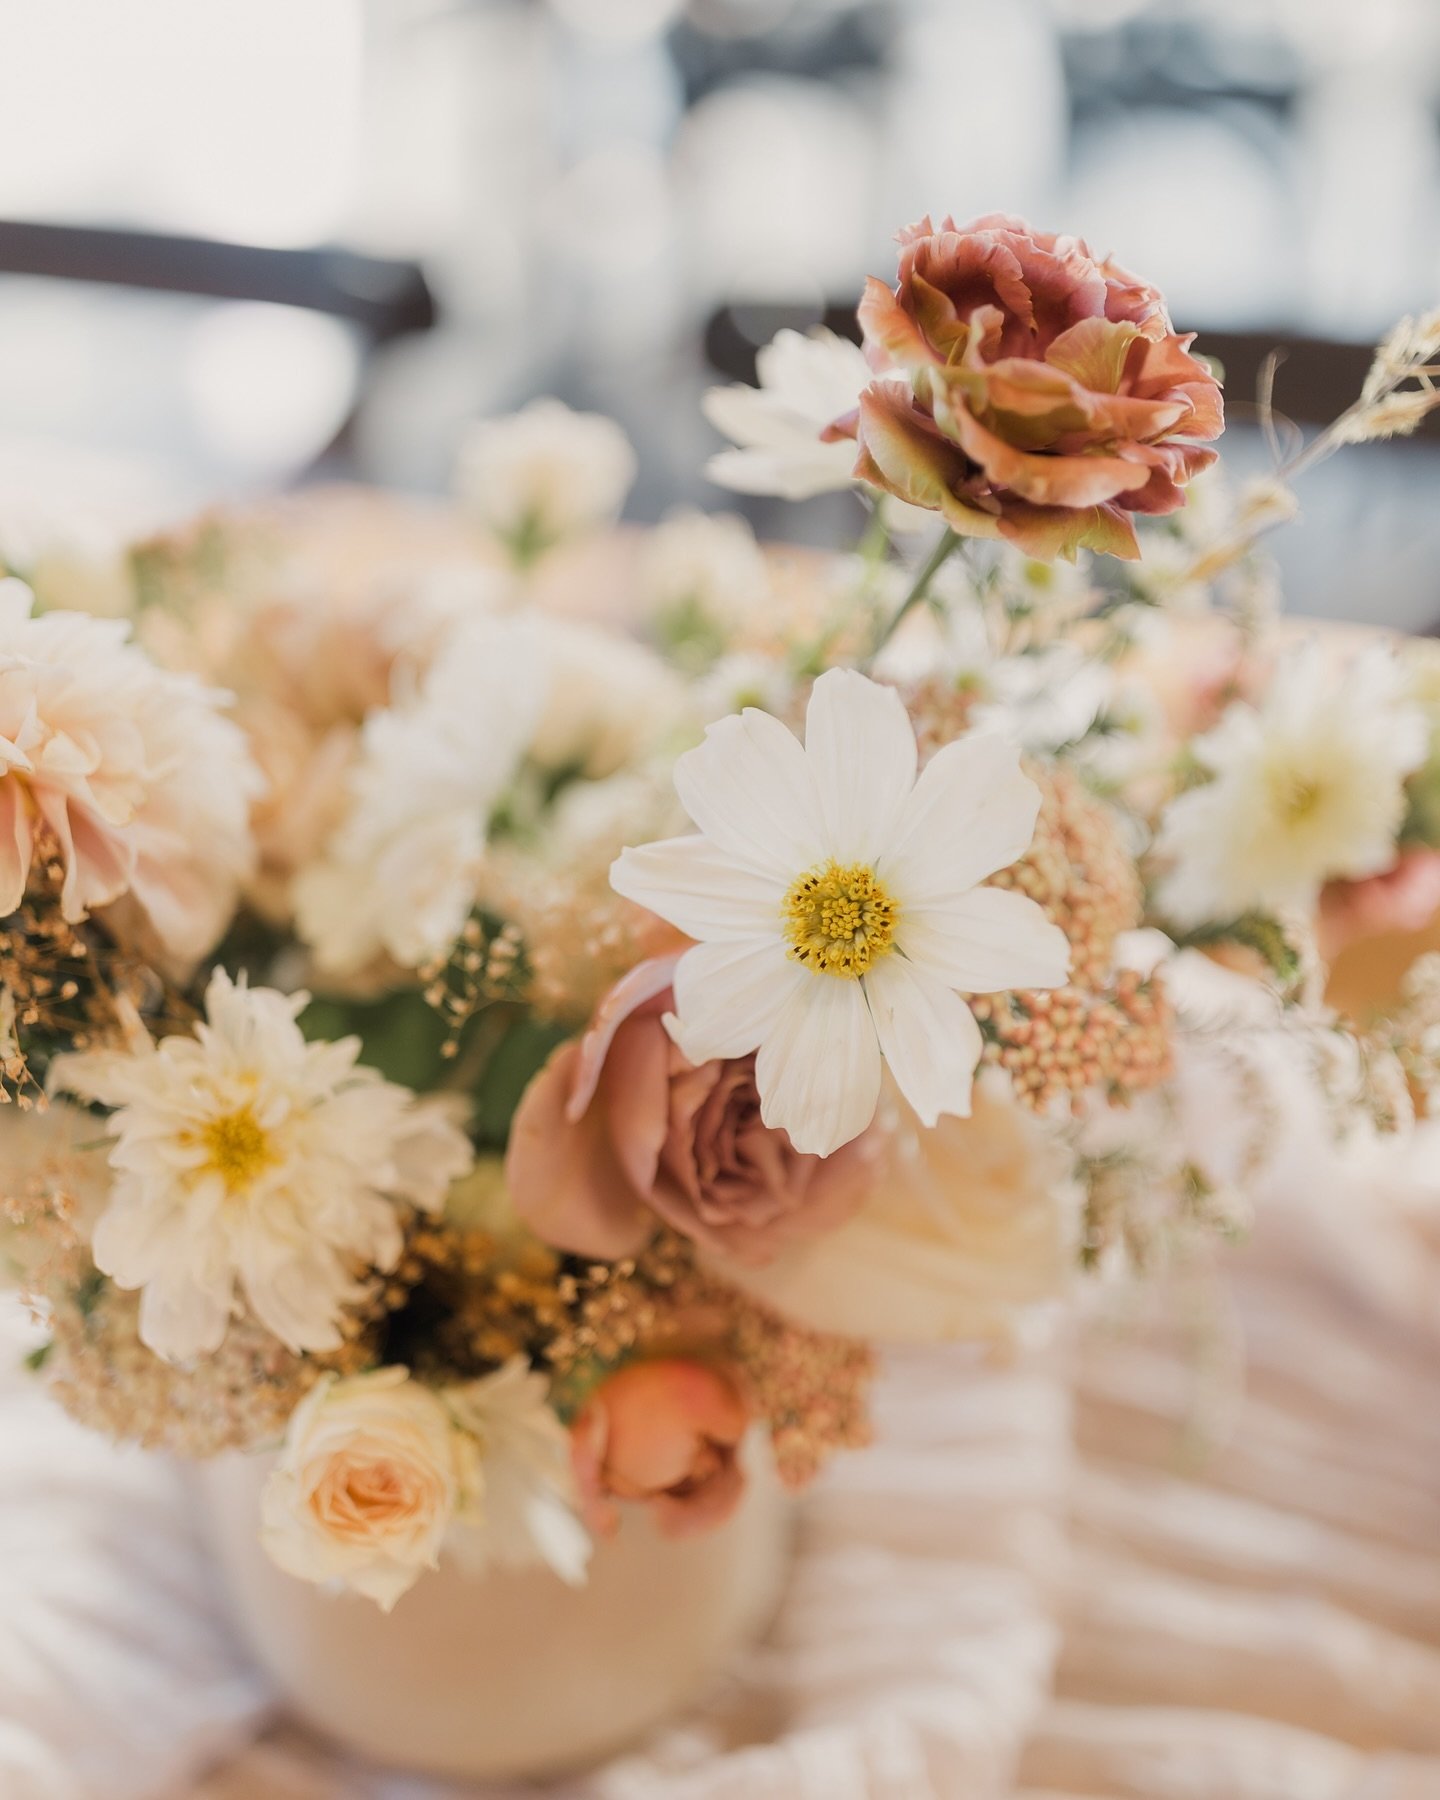 ✨How much can I expect to spend on wedding flowers?✨

So many couples will be shocked about how much their wedding flowers cost. I am here to tell you up front so you know what to expect.

When you hire a wedding florist not only are you purchasing f